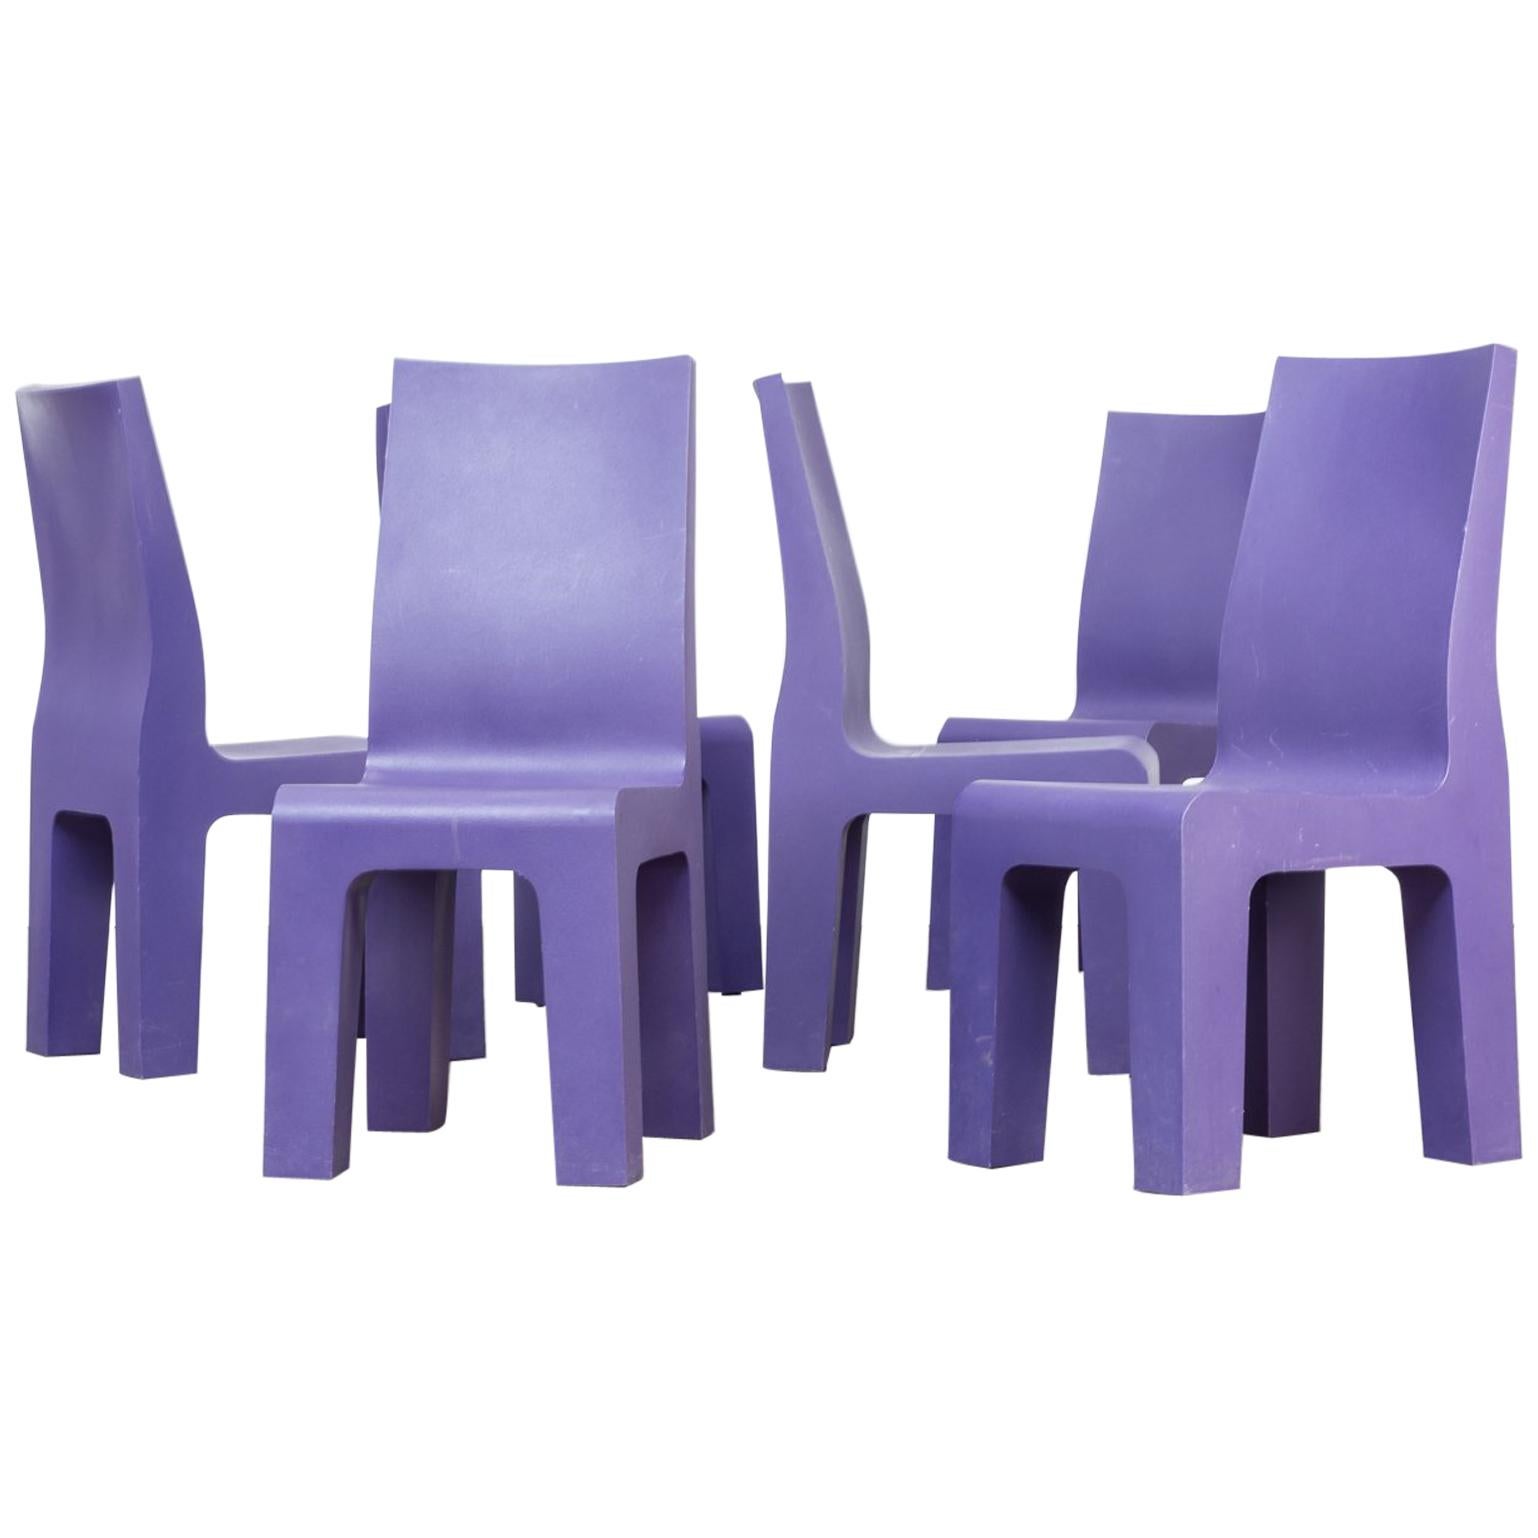 1990s Richard Hutten ‘Centraal Museum’ Chair for Gispen Set of Six For Sale